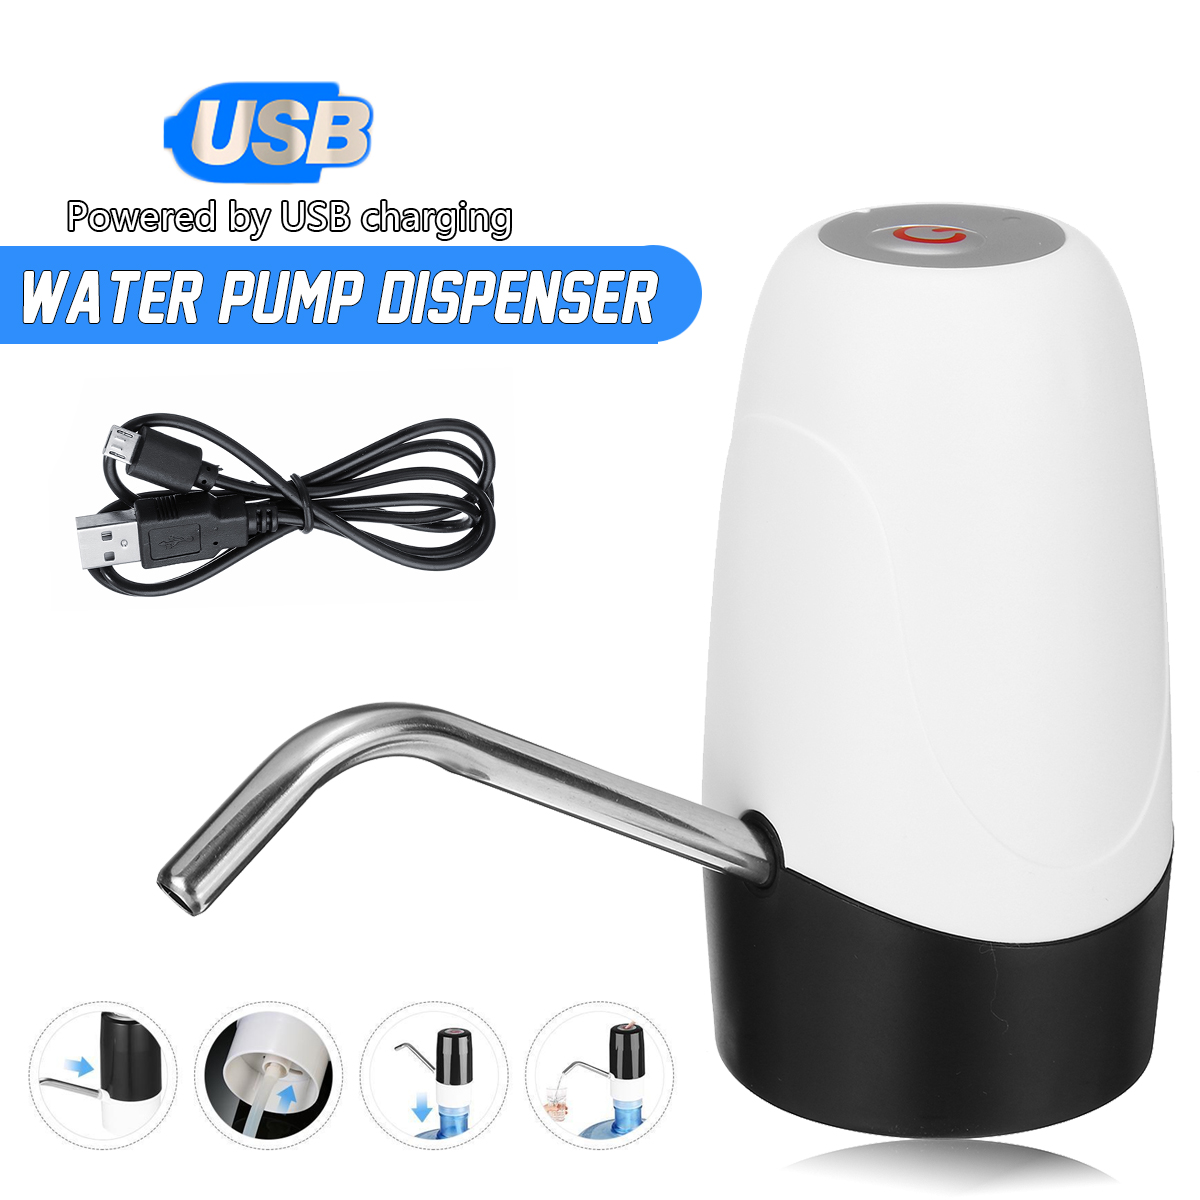 Automatic-Electric-Water-Pump-Dispenser-USB-Charging-Drinking-Bottle-Switch-Pump-1684971-3